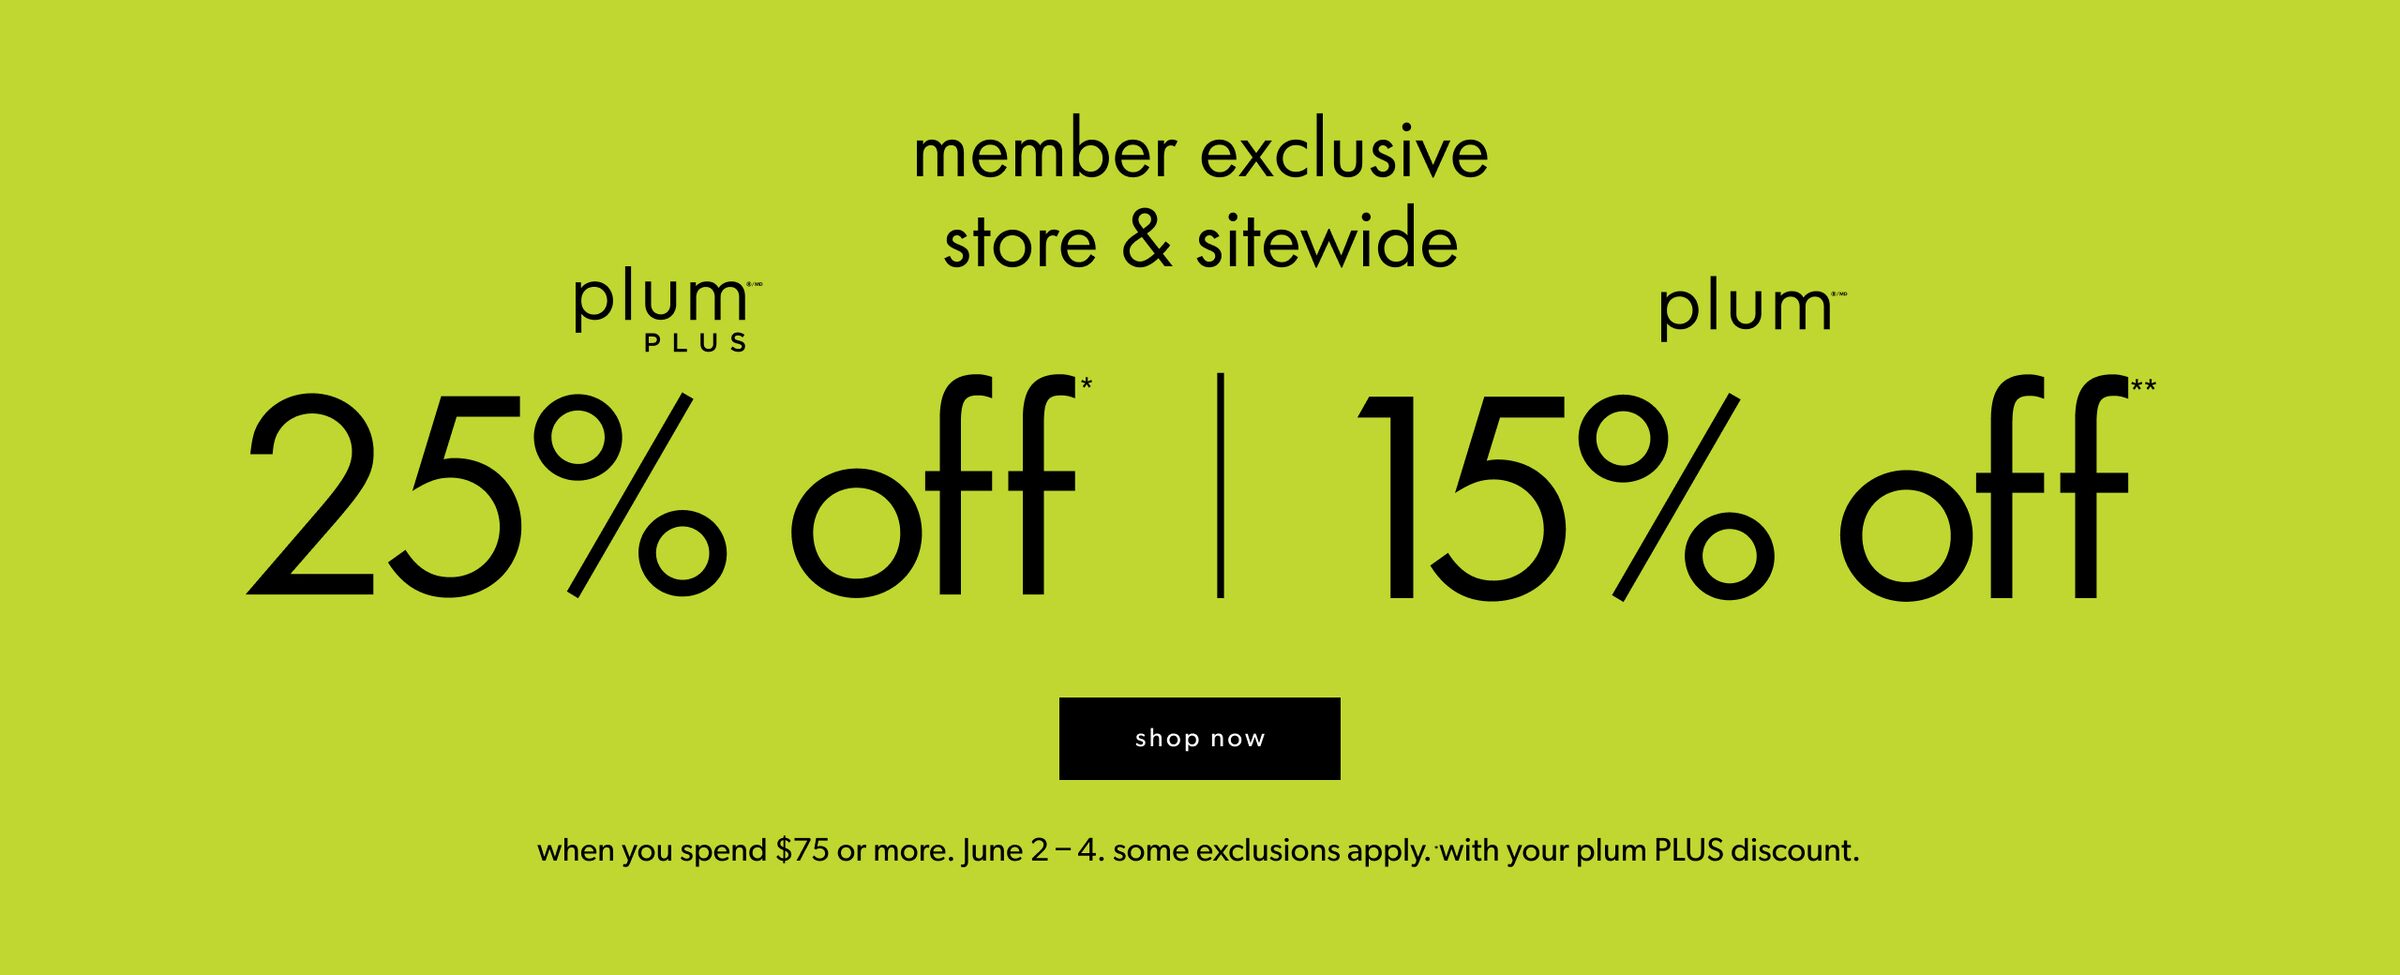 25% off for plum plus members, 15% off for plum members when you spend $75 or more.